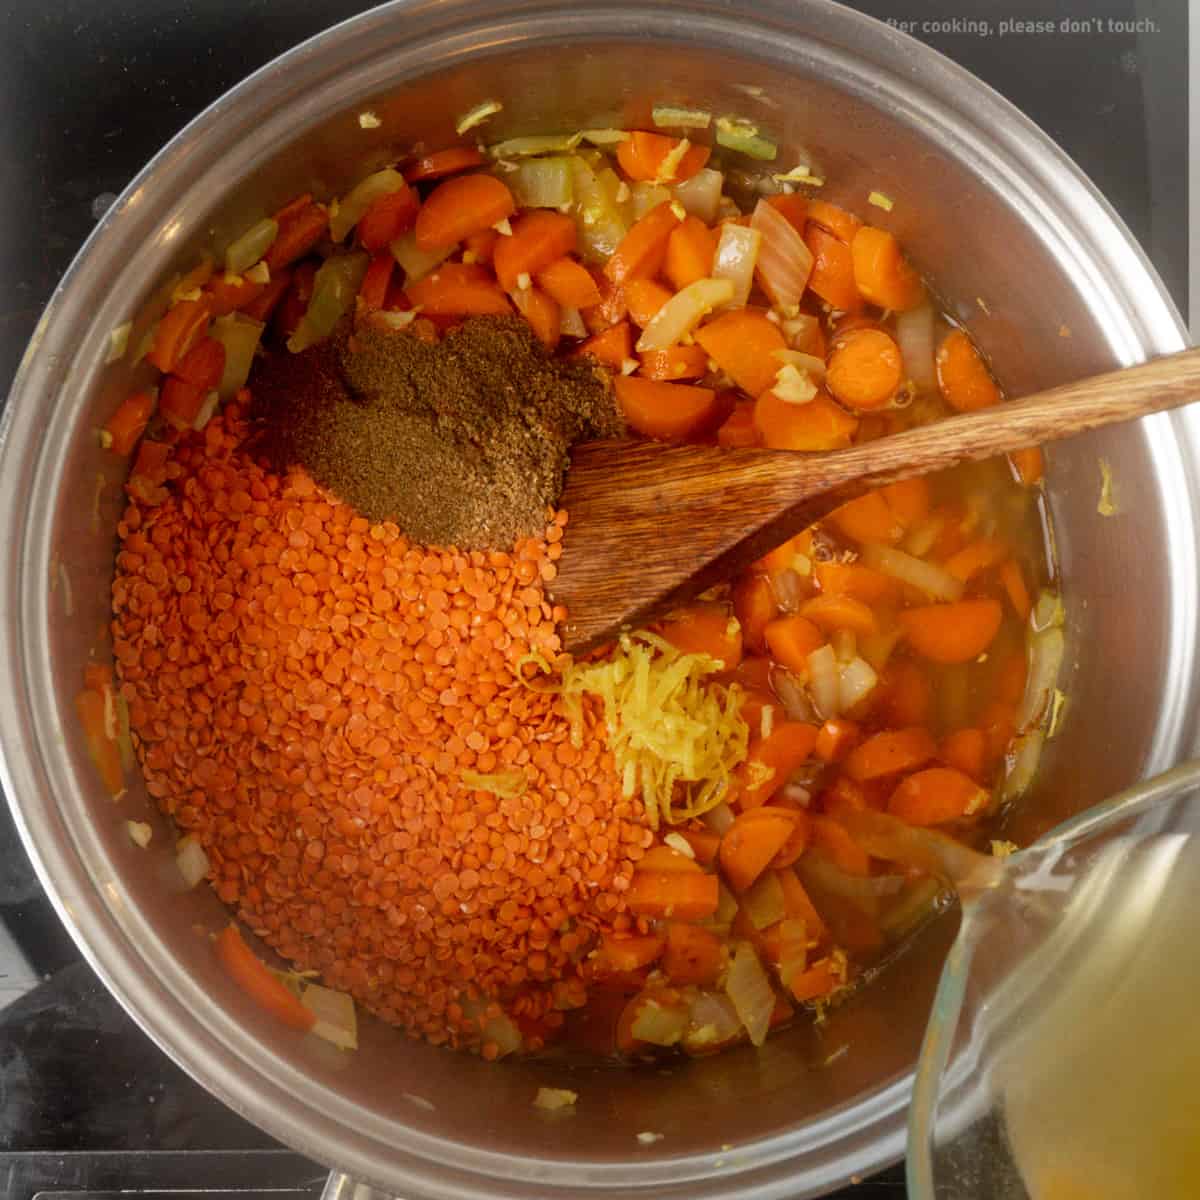 Red lentils, ground spices, lemon zest and vegetable broth are added to a saucepan containing chopped carrots and lentils.